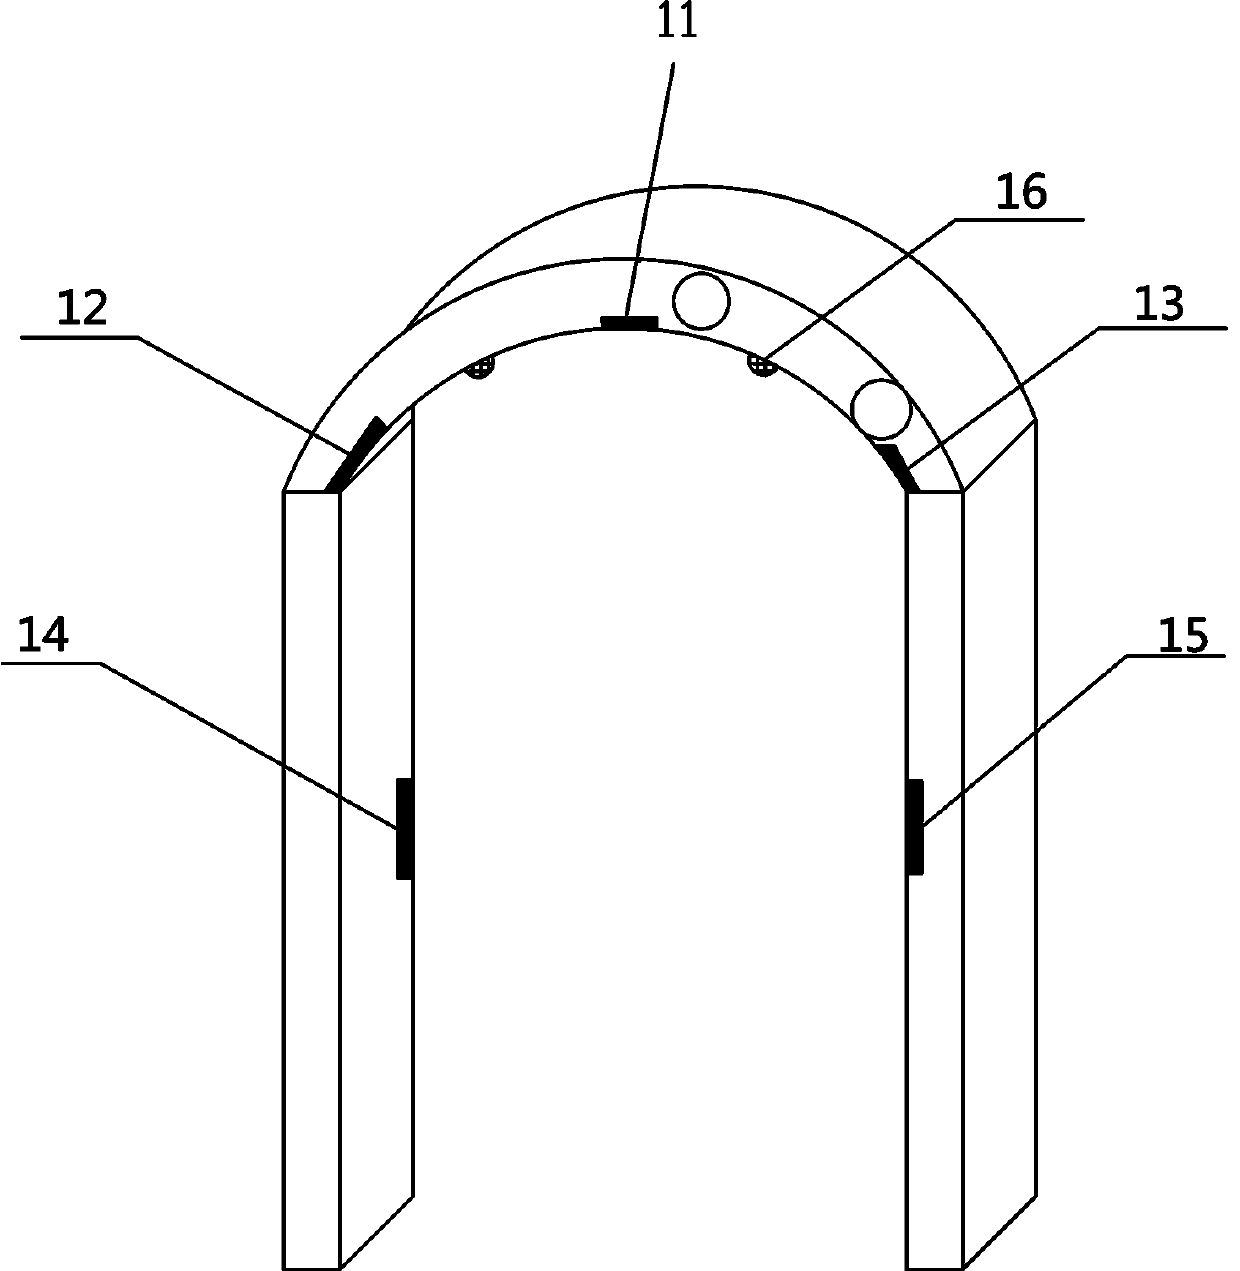 Device and method for simulating forces in different areas of arched tunnel